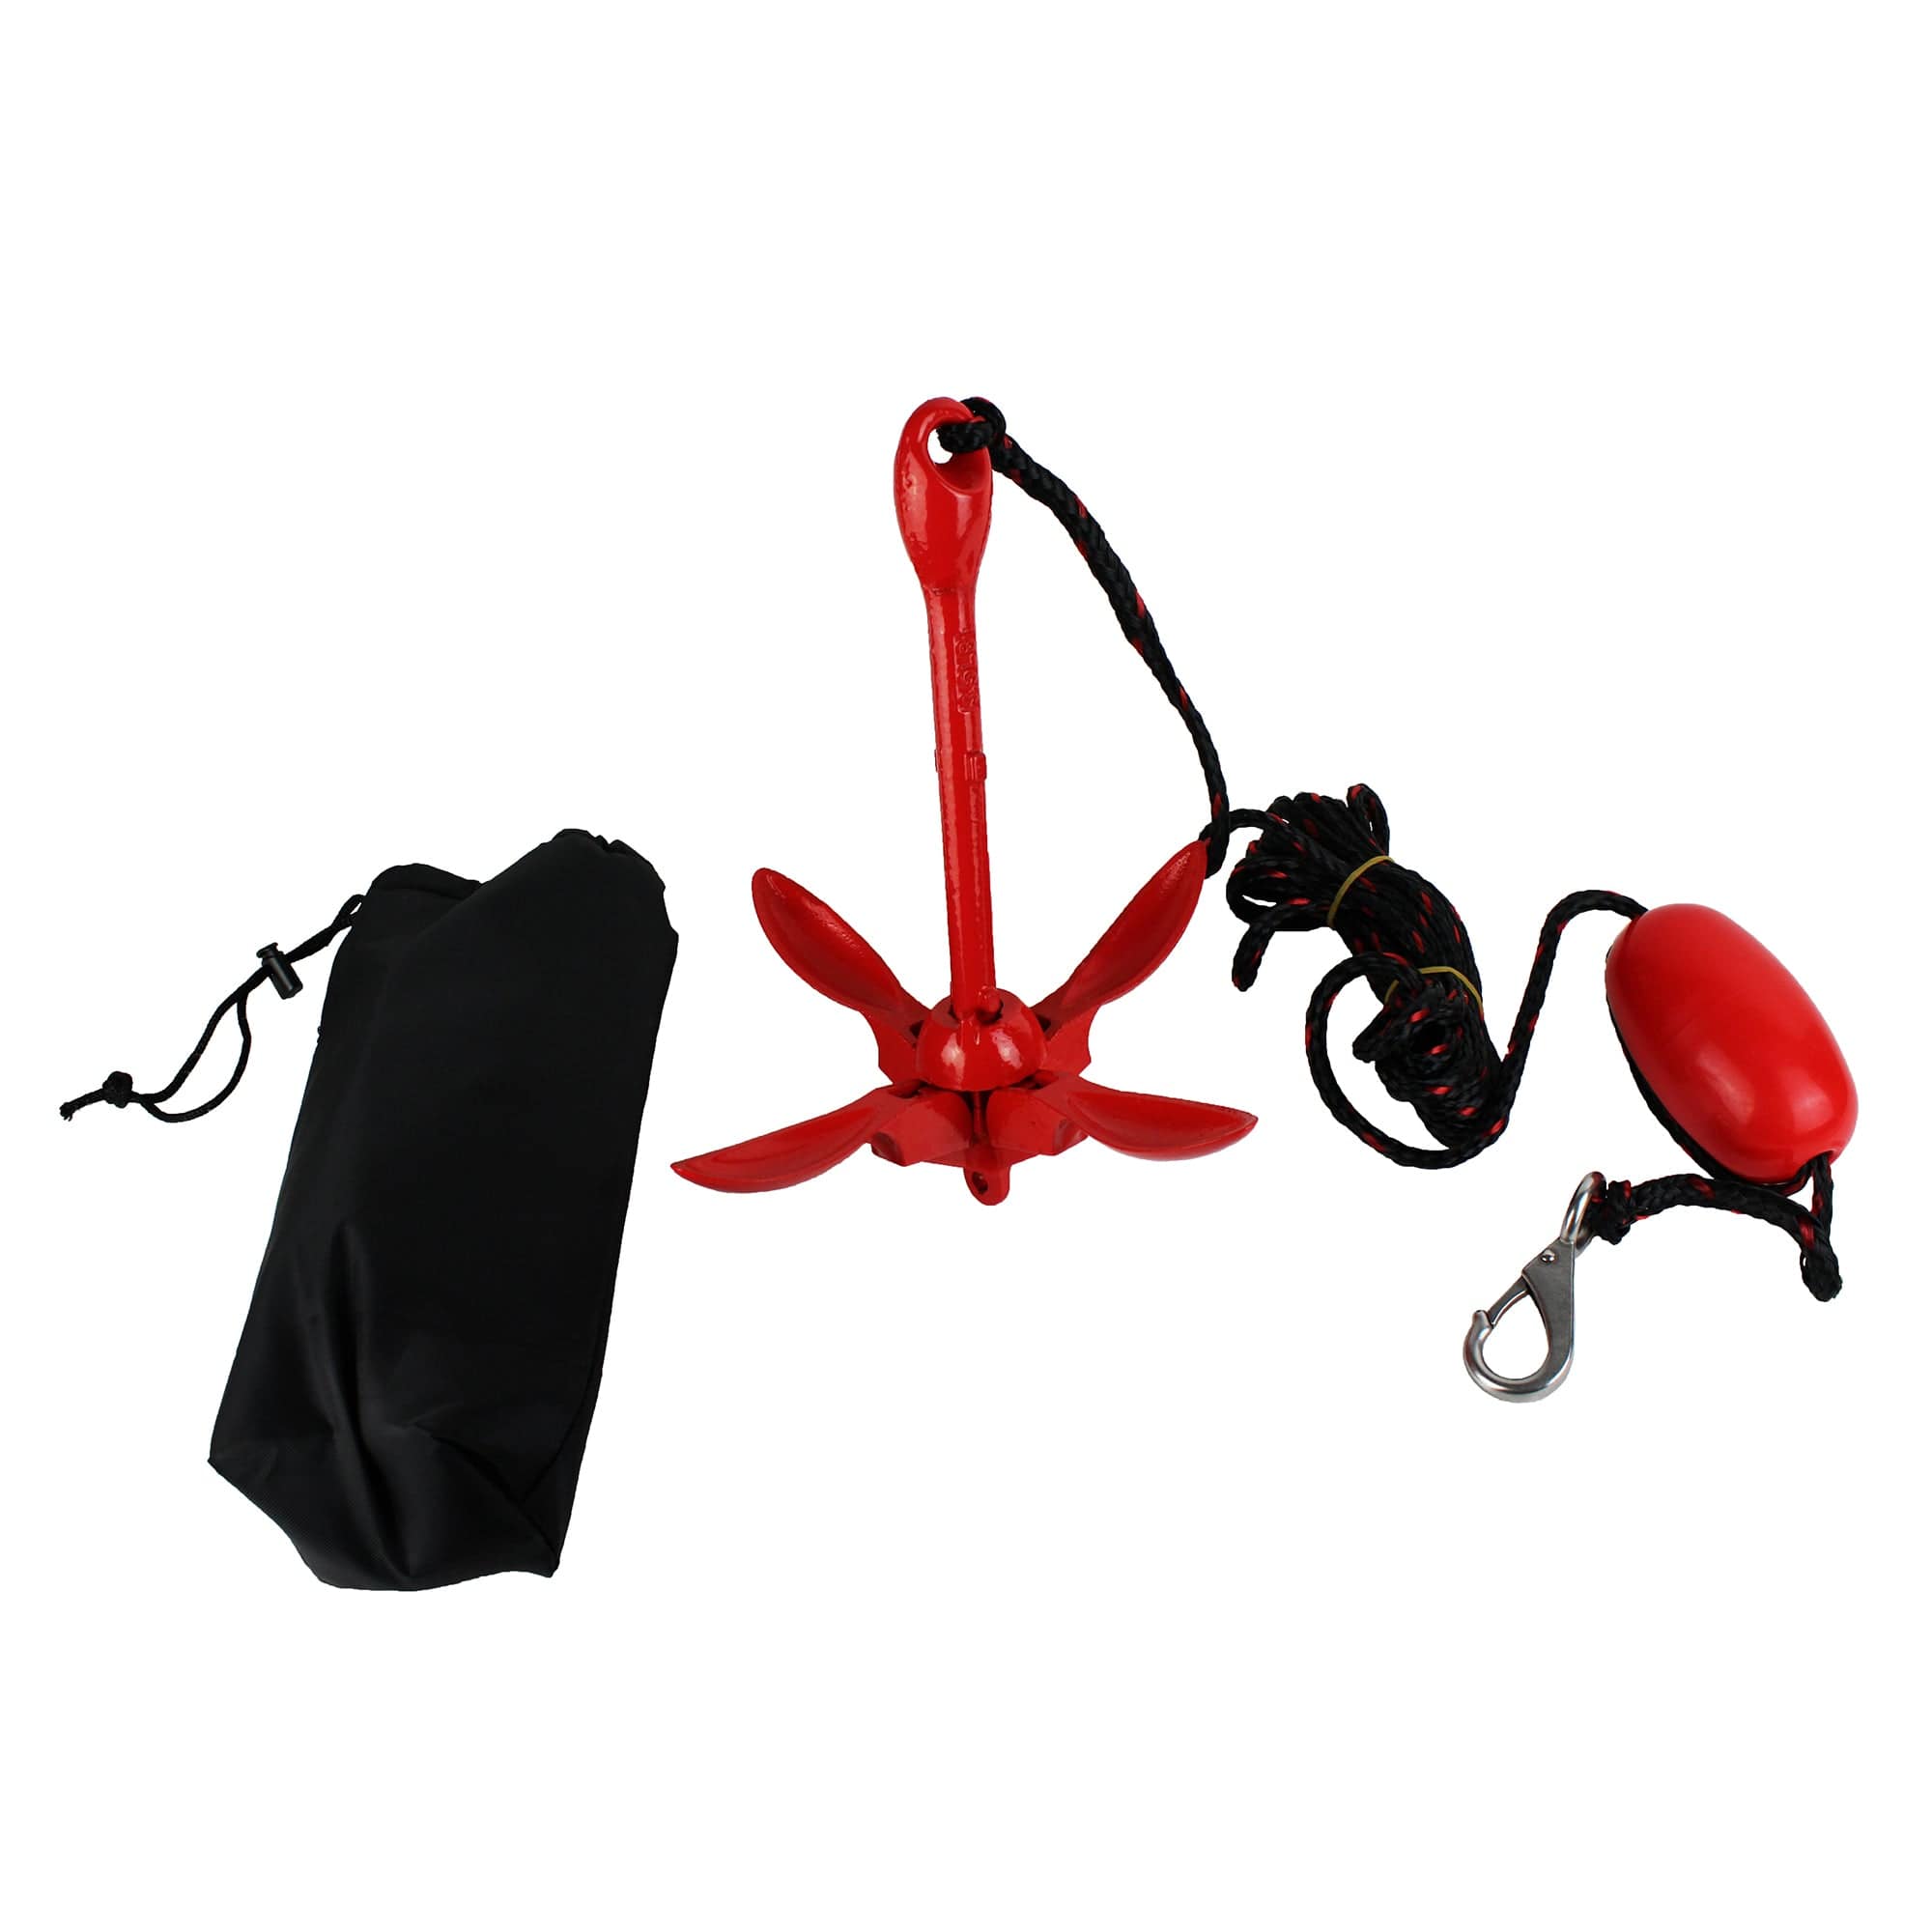 Attwood 11969-4 3.5 Lb. Grapnel Folding Iron Anchor Kit - Red